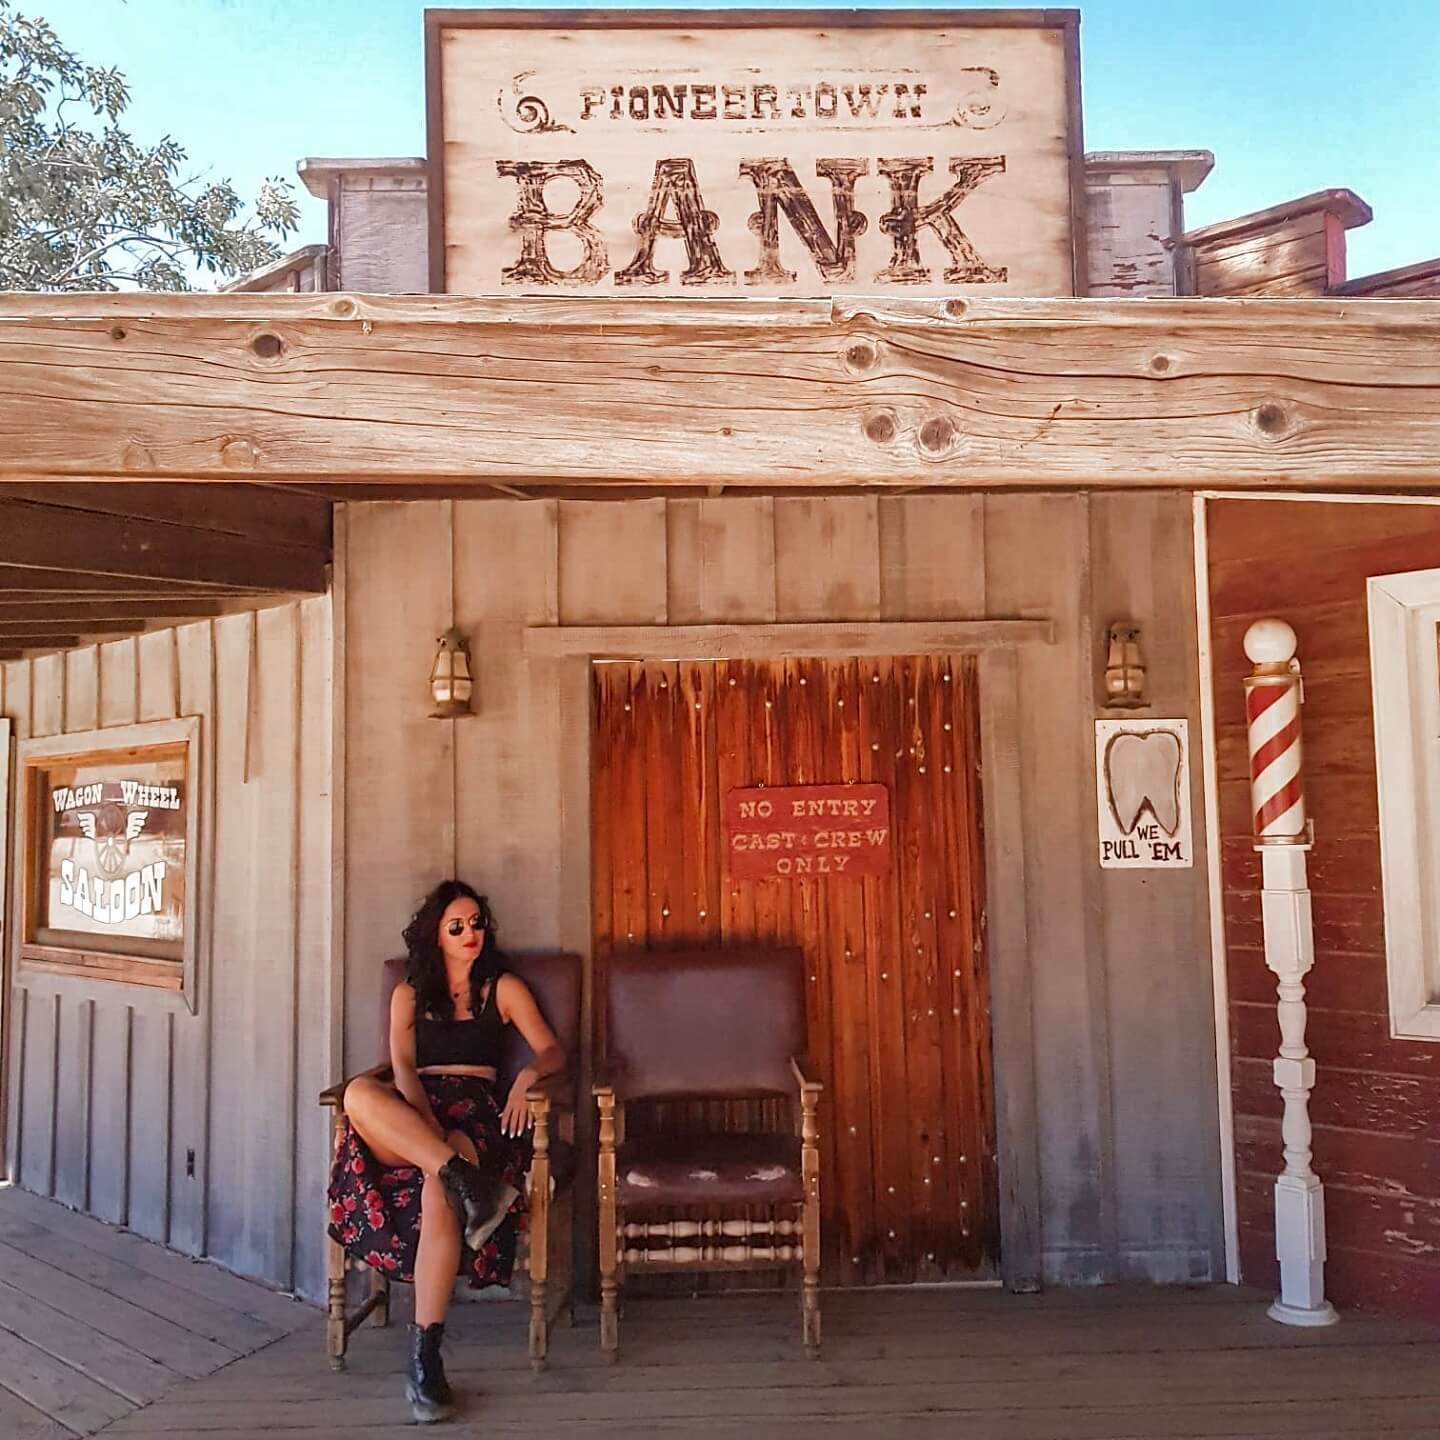 Bank ghost town USA